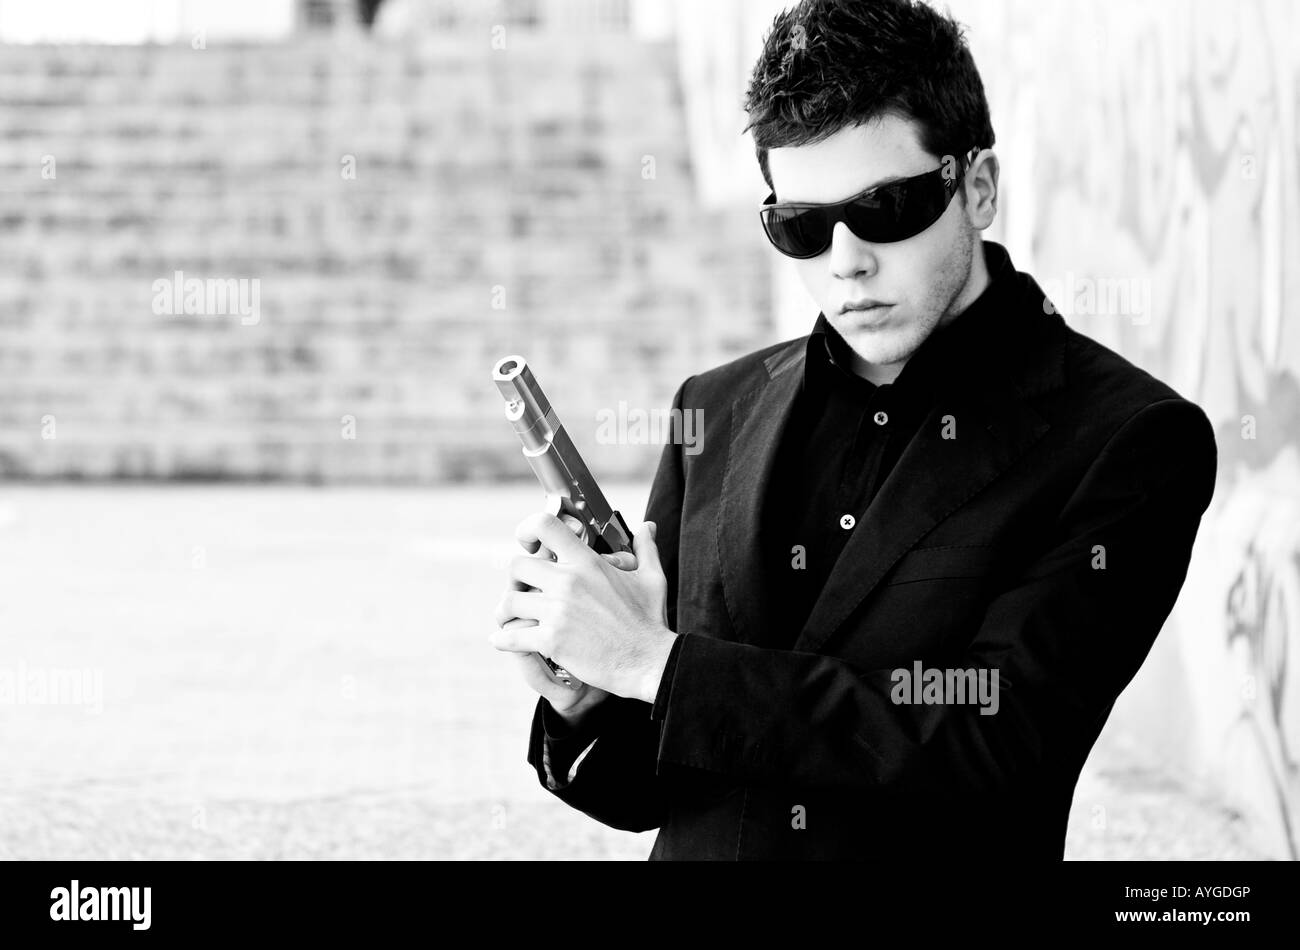 Male model performing secret agent with gun Stock Photo